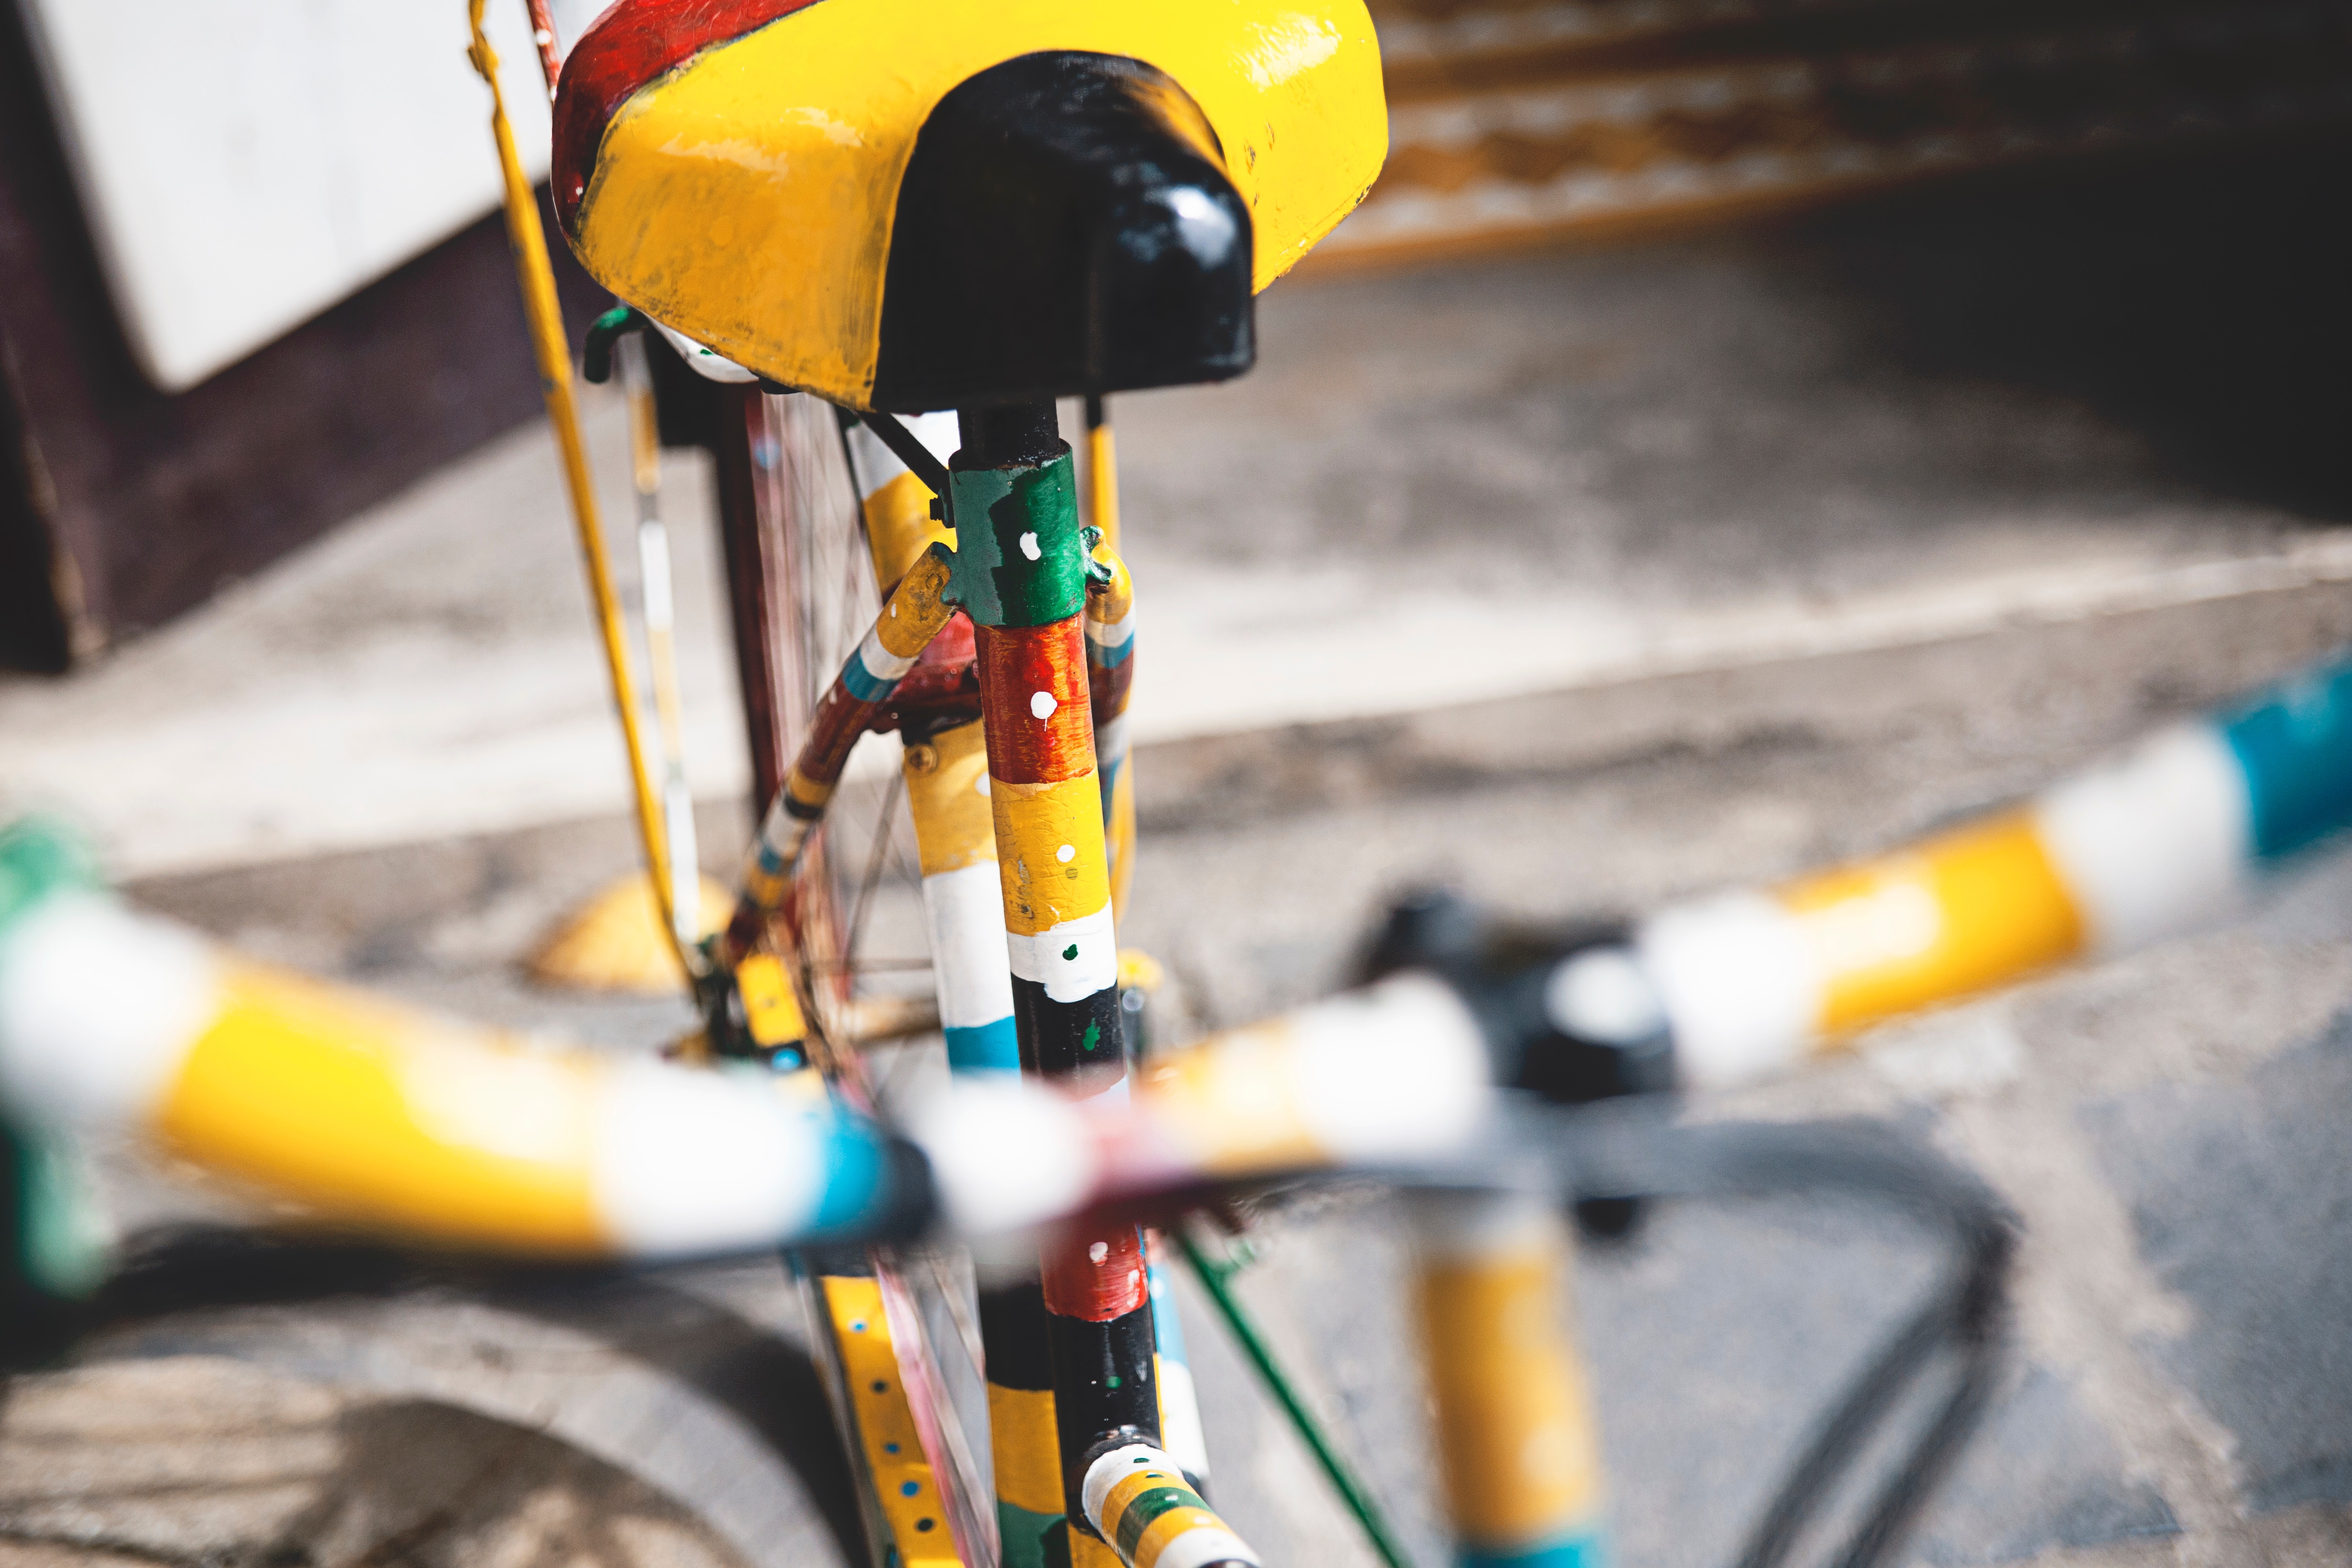 custom bicycle example in 6 valuable 1-to-1 personalized video tips for digital communicators